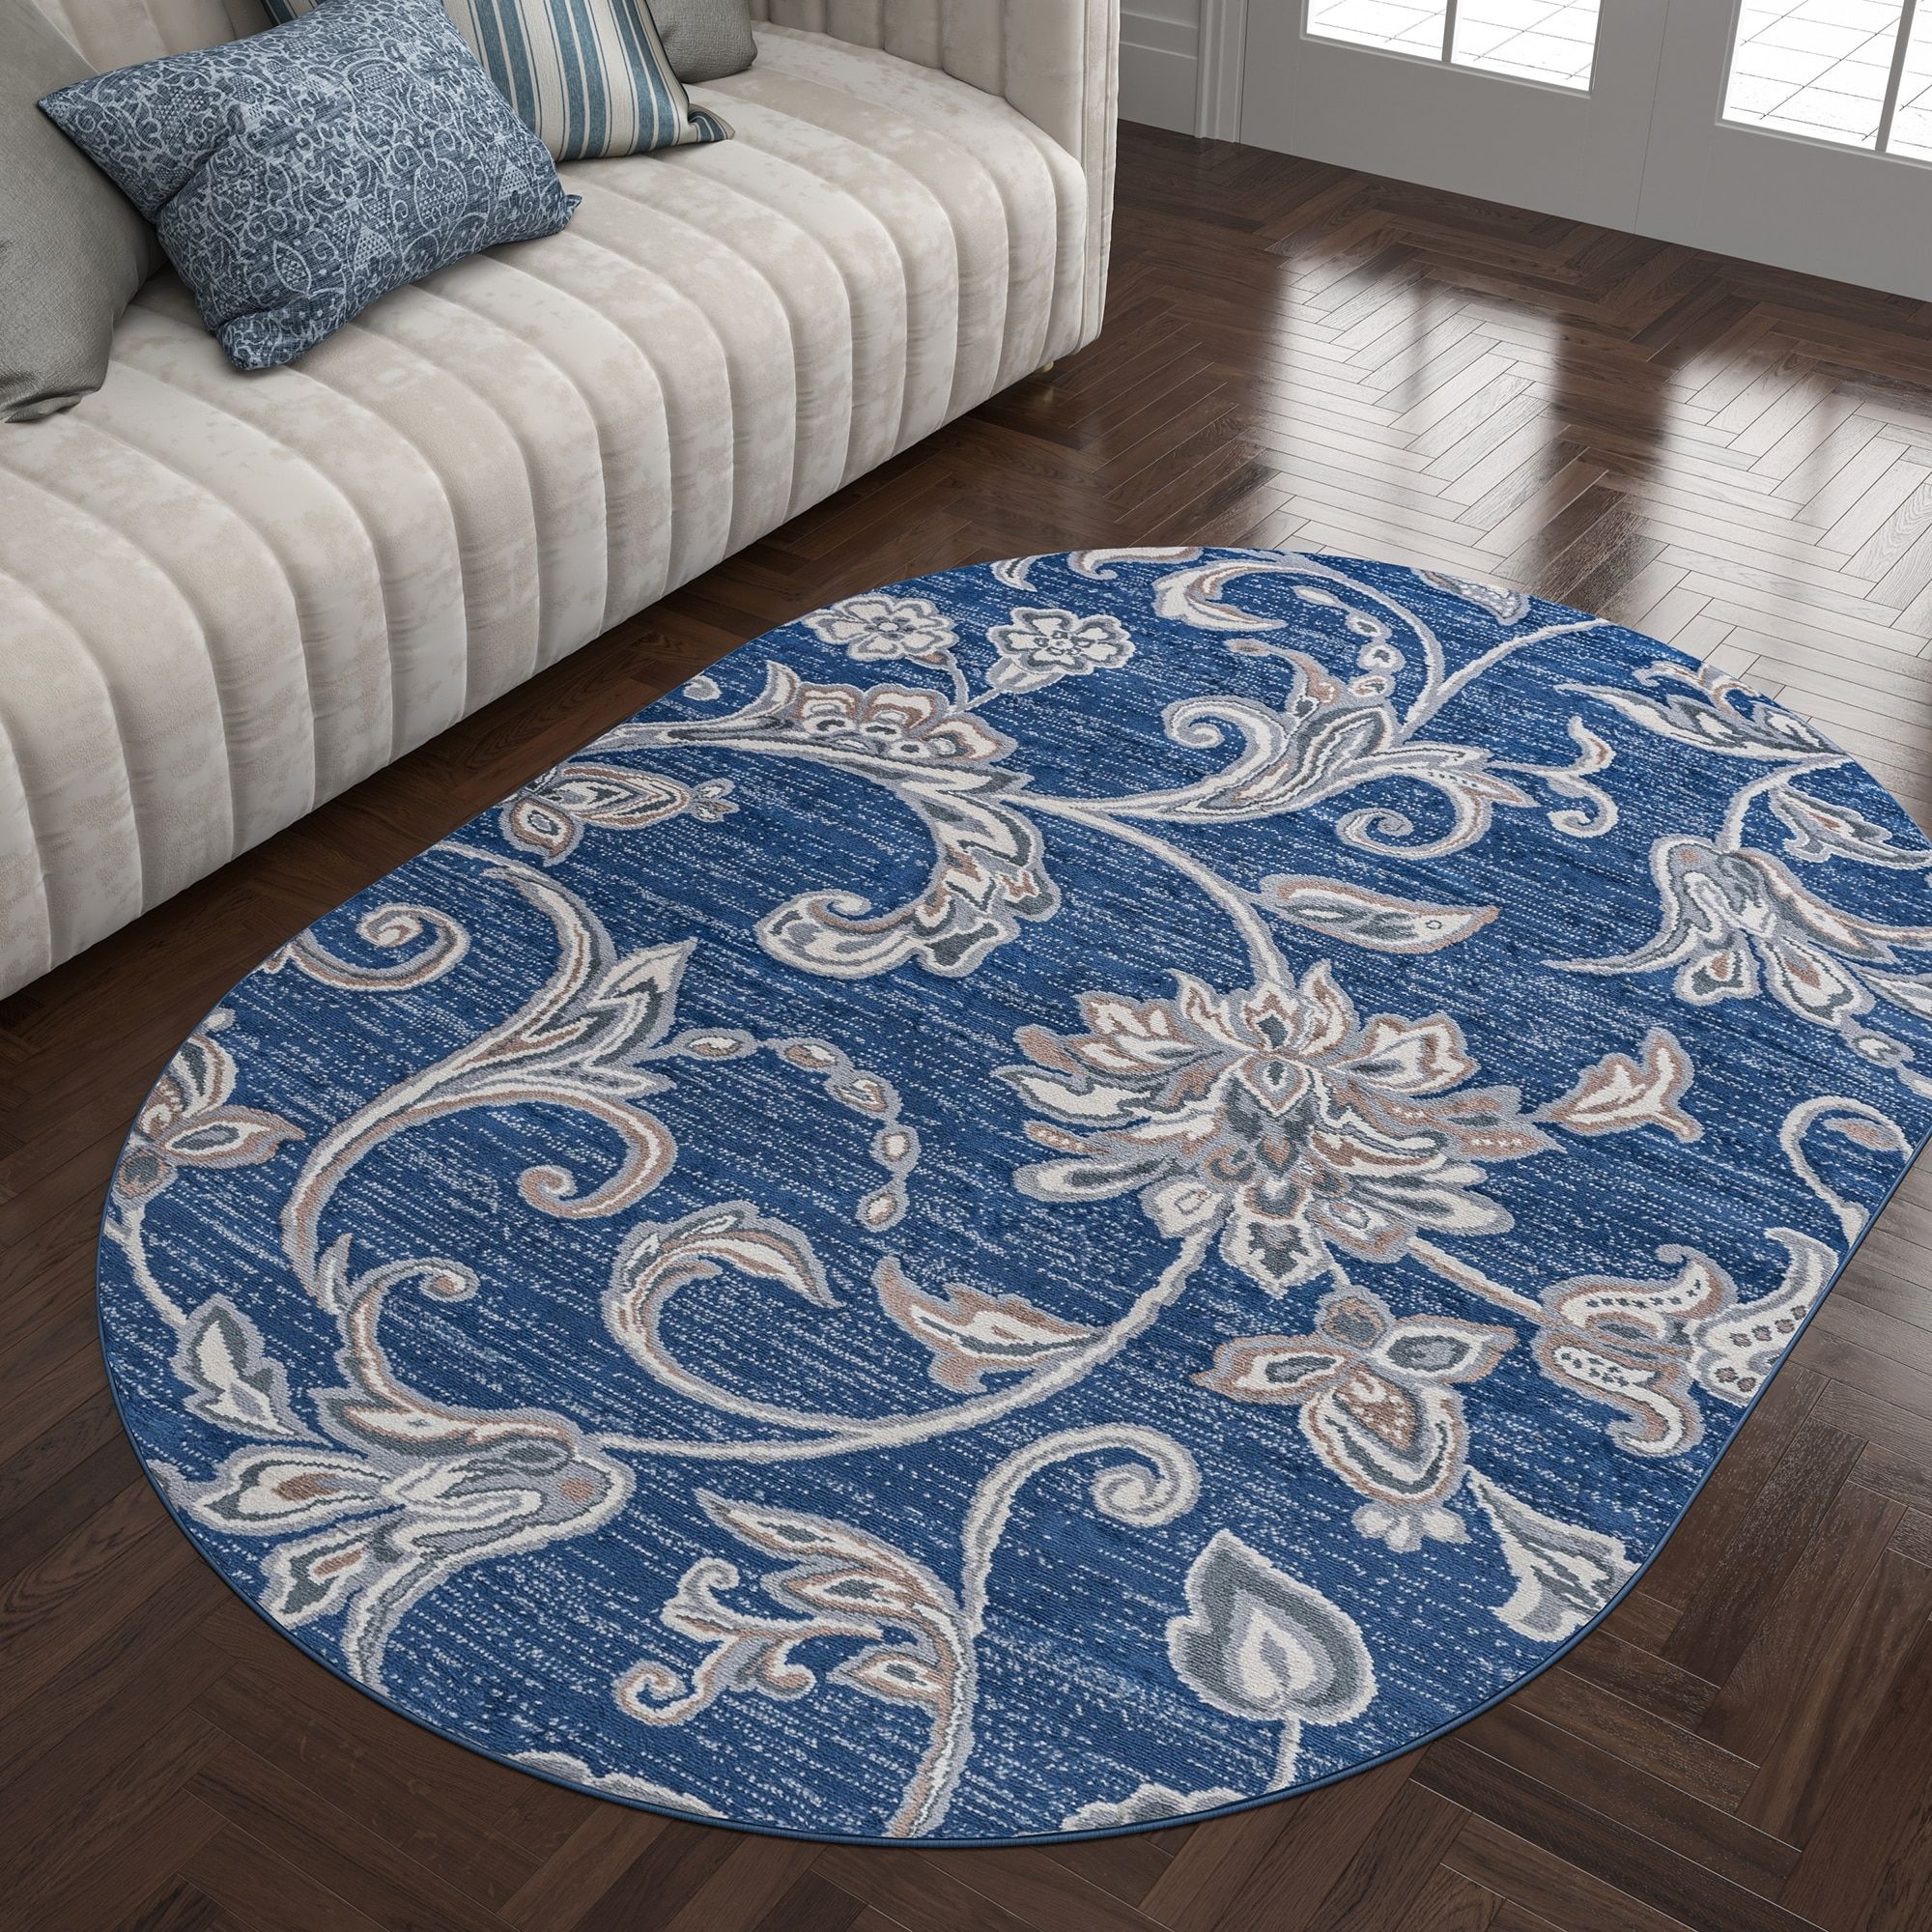 Alise Rugs Carrington Transitional Floral & Botanical Indoor Area Rug Navy  5'3'' X 7'3'' Oval Floral & Botanical 5' X 8' Indoor Living Room, Bedroom,  – Walmart With Regard To Botanical Oval Rugs (View 3 of 15)